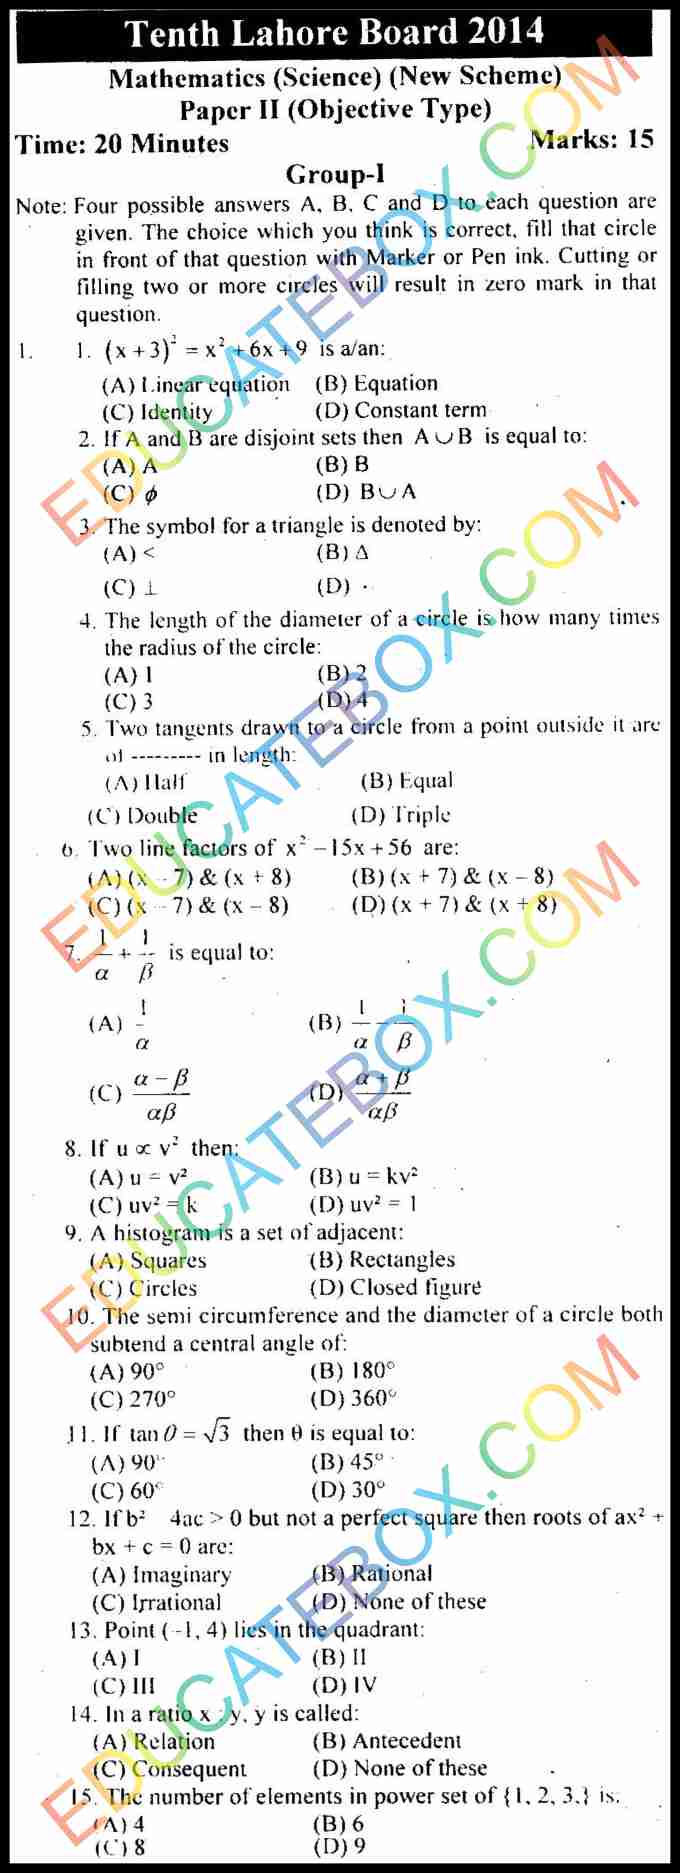 Past Paper Class 10 Maths (Science Group) Lahore Board 2014 Objective Type Group 1 (English Medium)